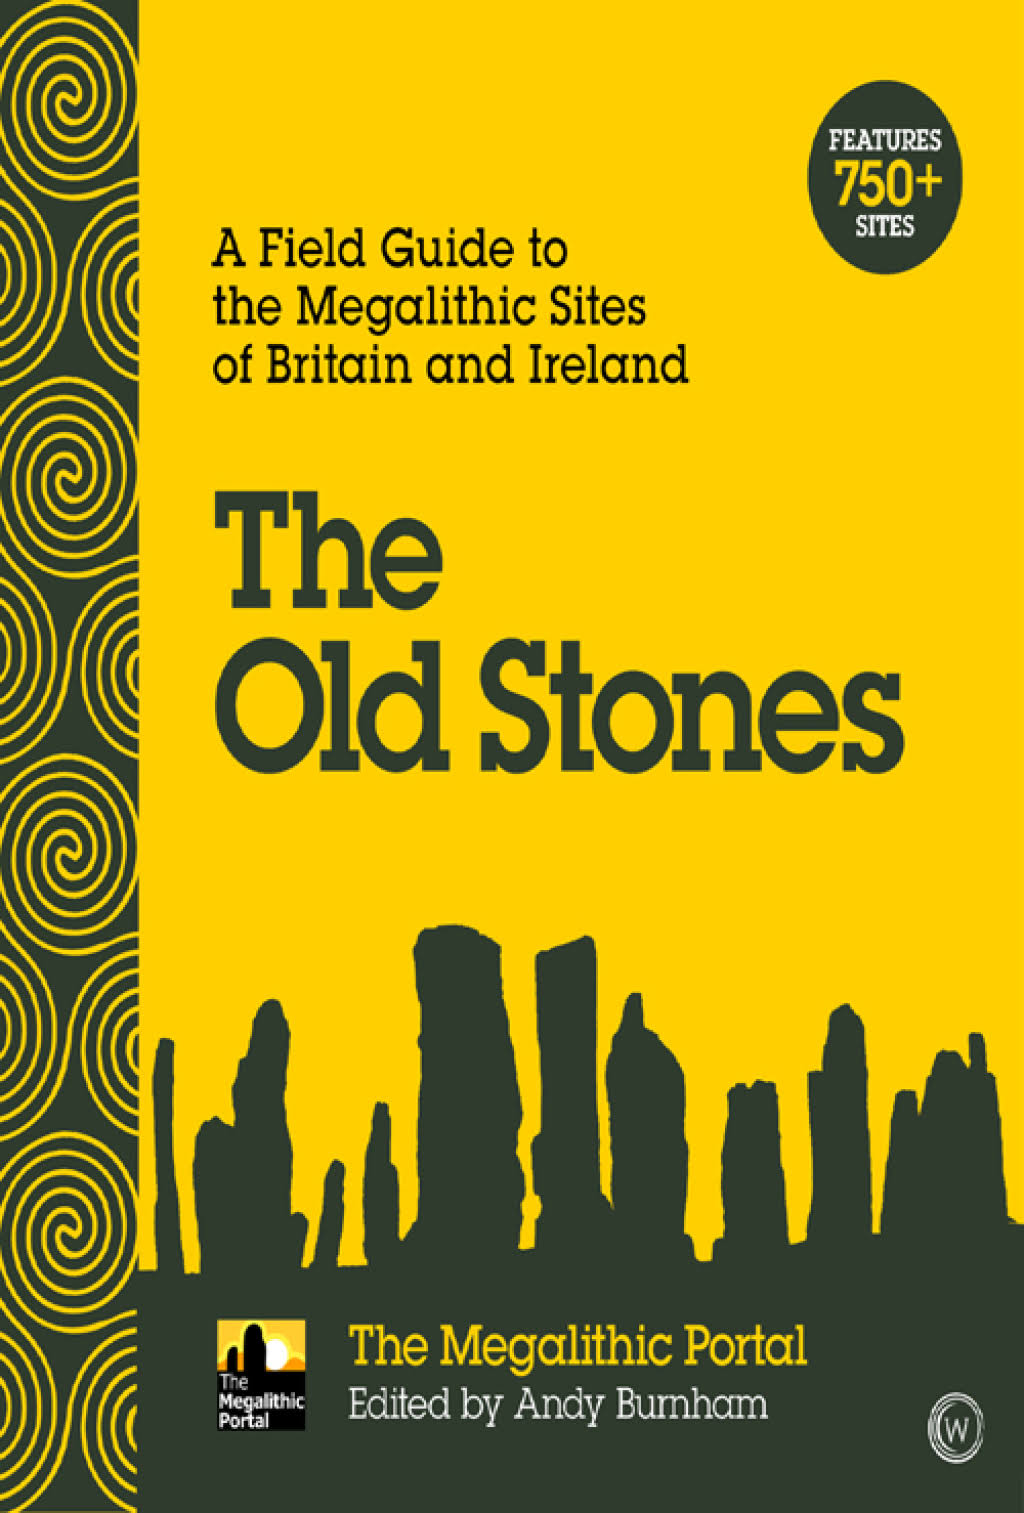 The Old Stones: A Field Guide to the Megalithic Sites of Britain and Ireland [Book]